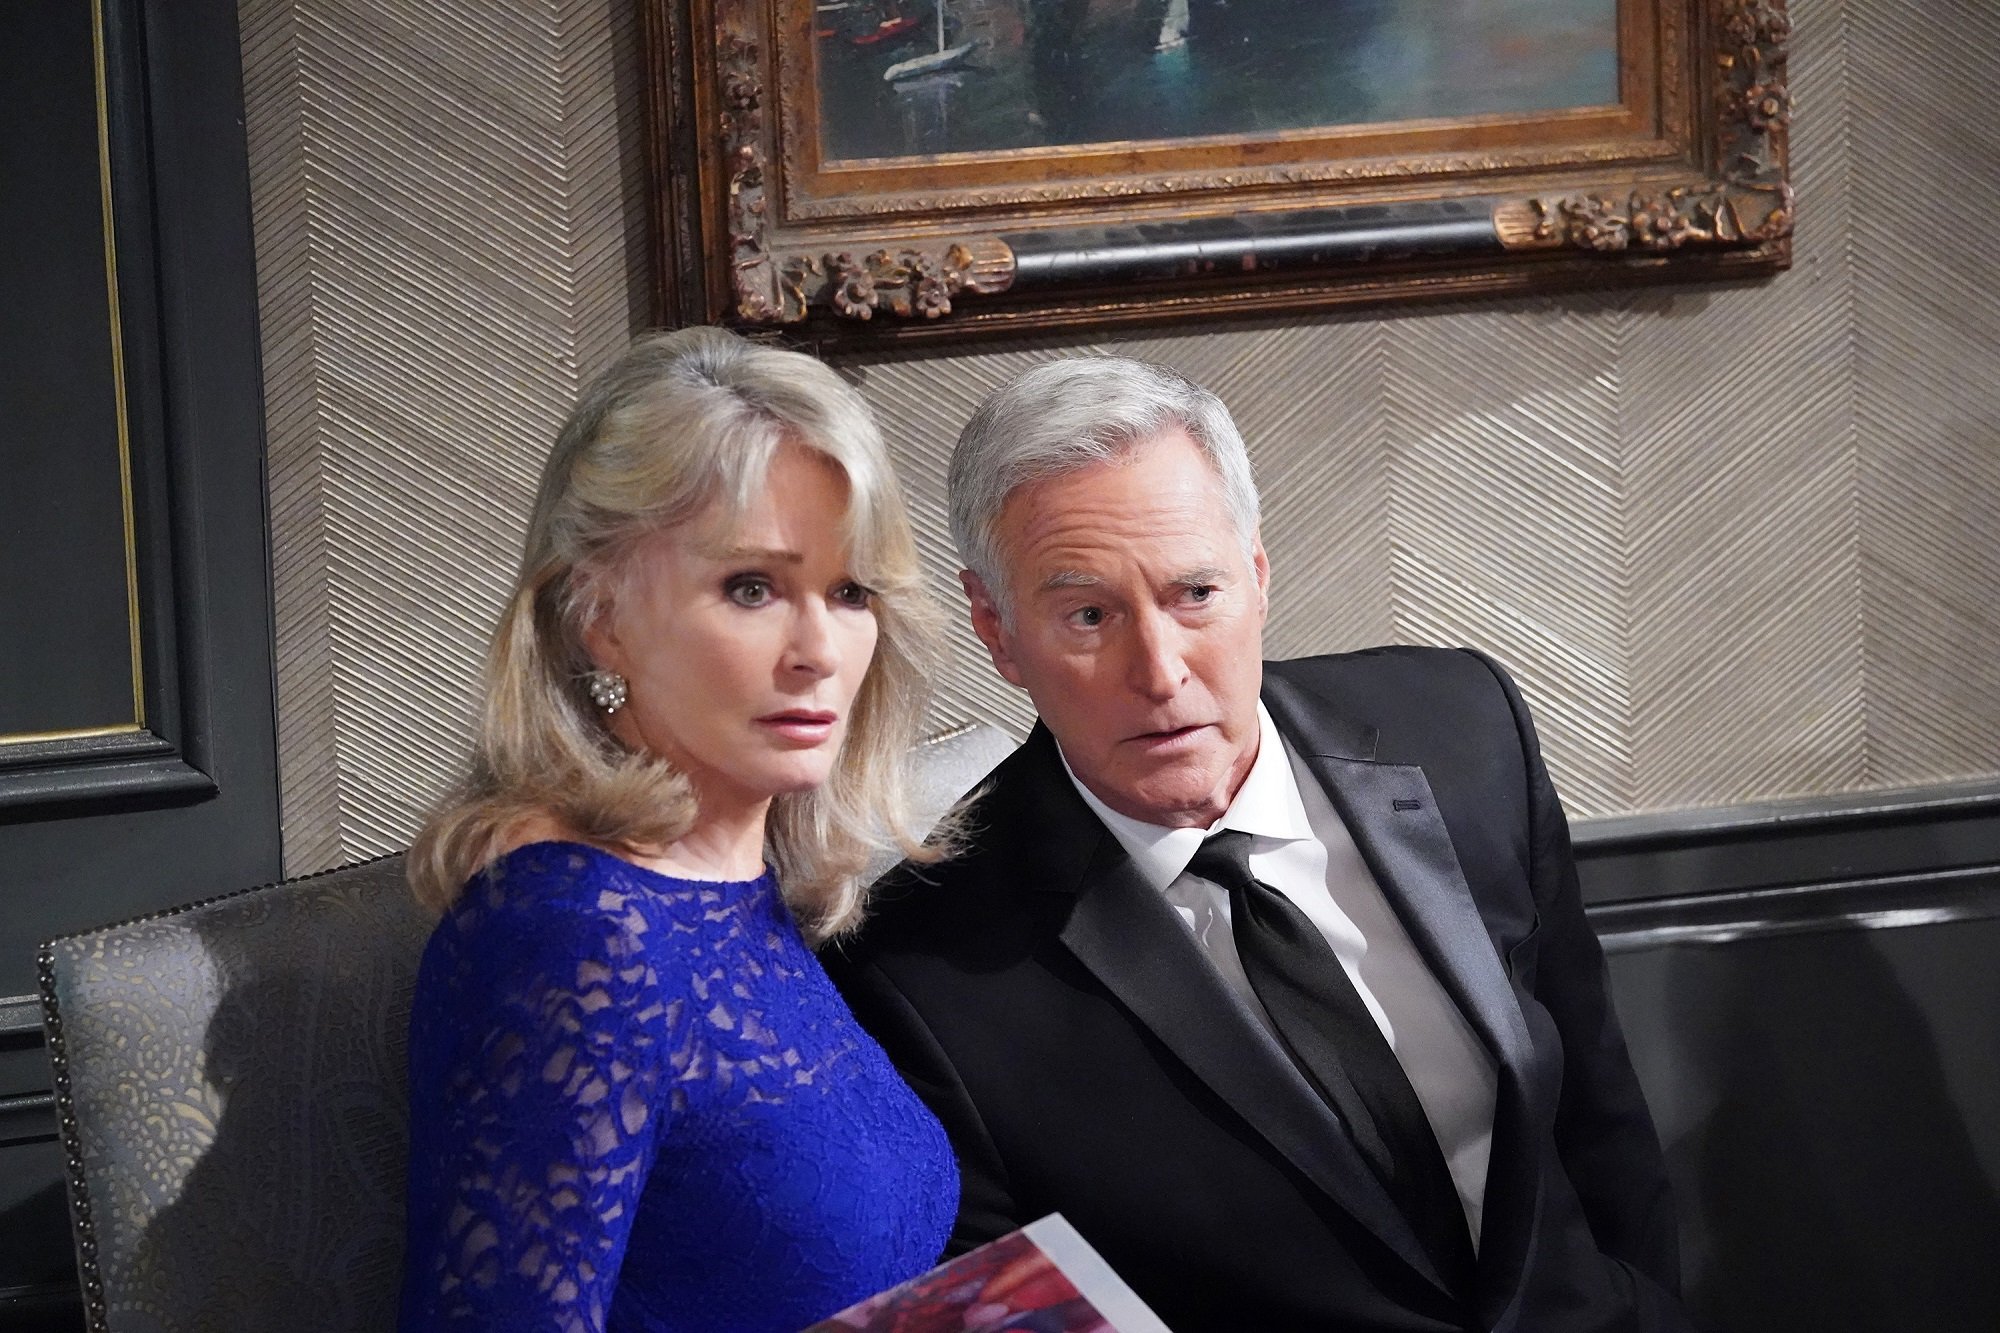 Days of Our Lives spoilers focus on Marlena, pictured here in a blue sequined dress